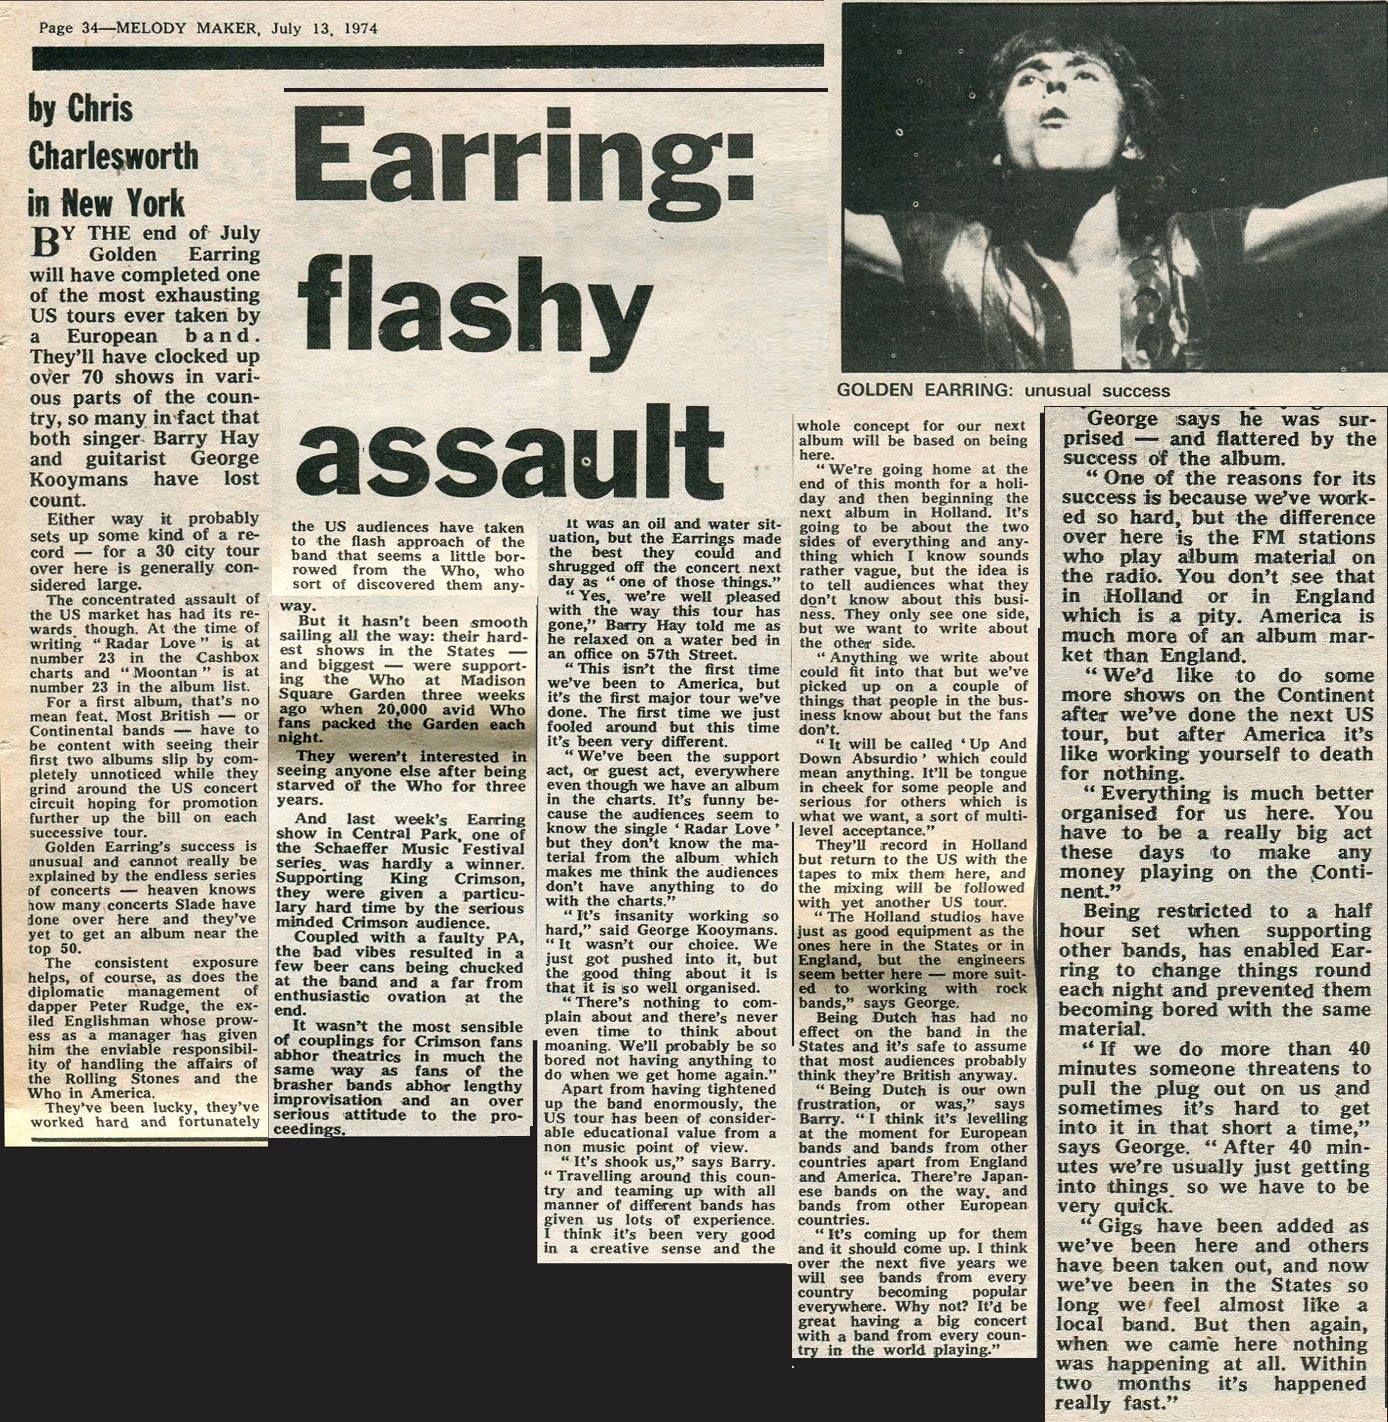 Melody Maker magazine (UK) published a large article called Golden Earring: flashy assault